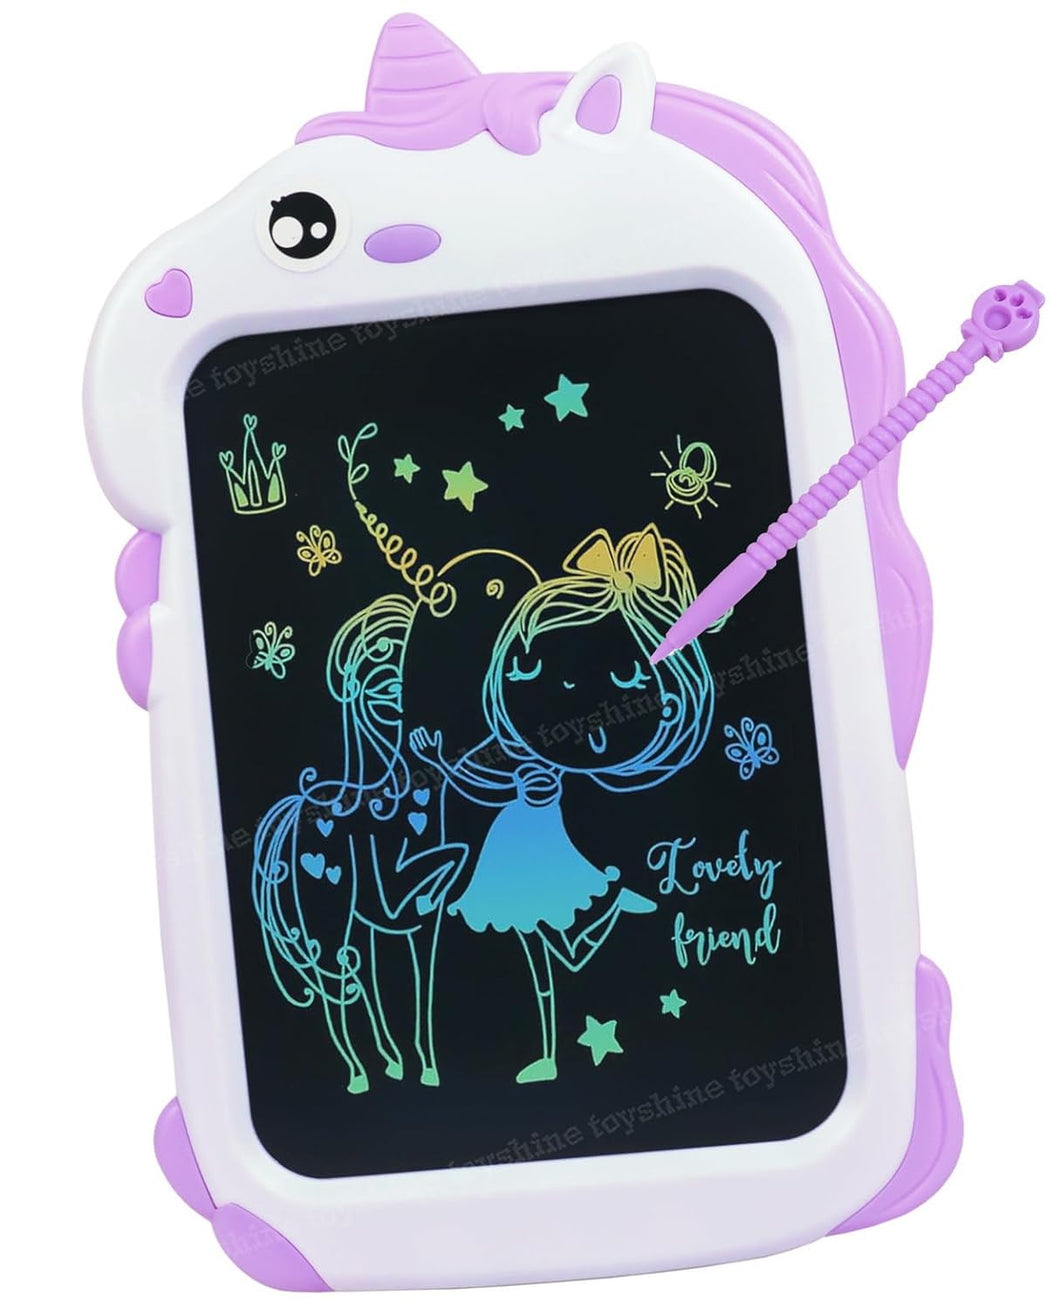 Big Size Writing Tablet for Kids,10 inches LCD Tab for Kids